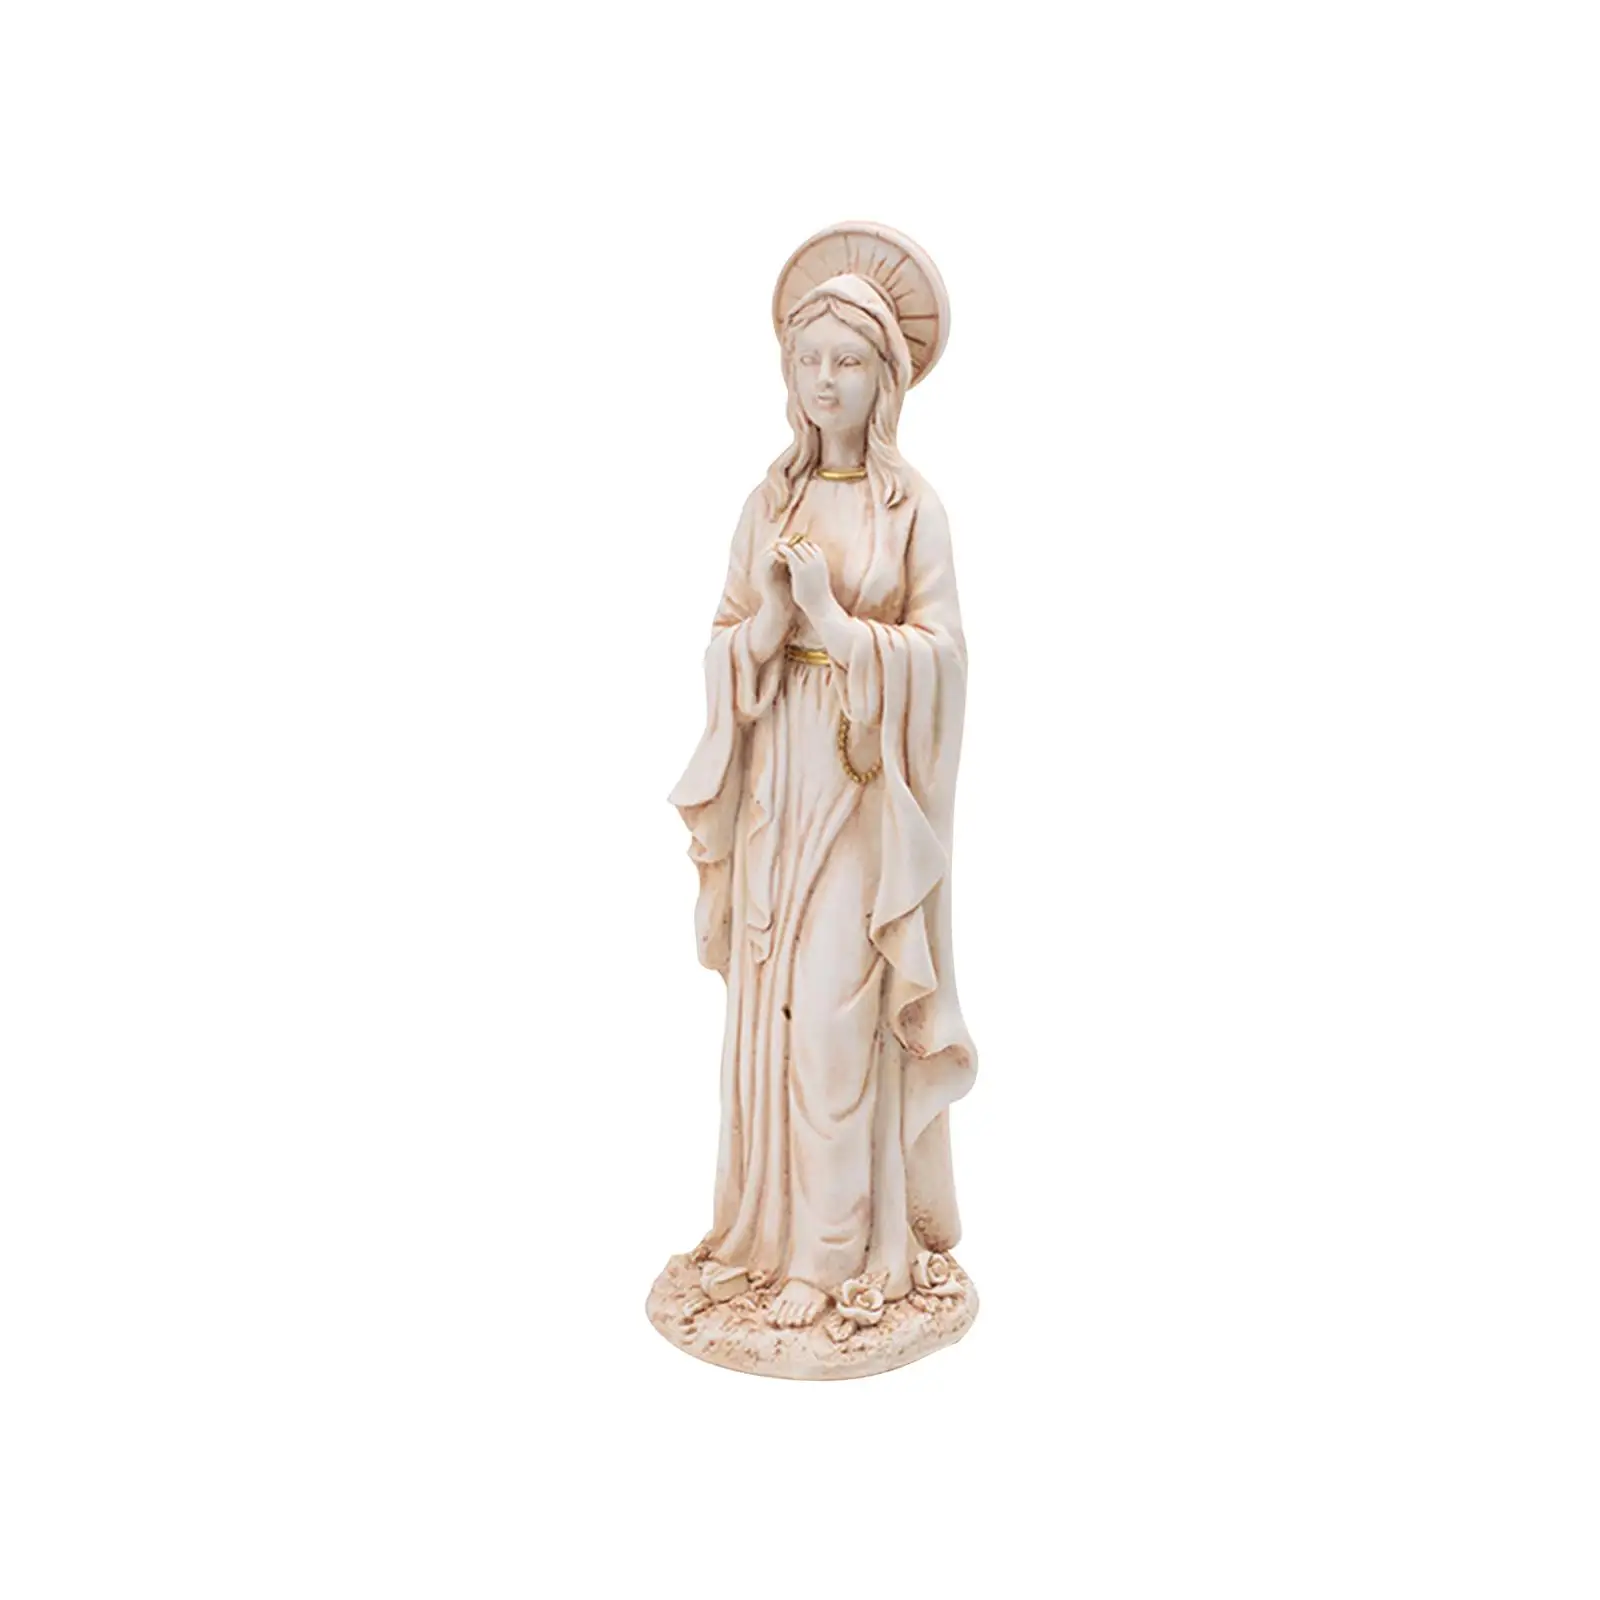 Virgin Mother Mary Statue Christian Decorative for Wedding Home Collectible